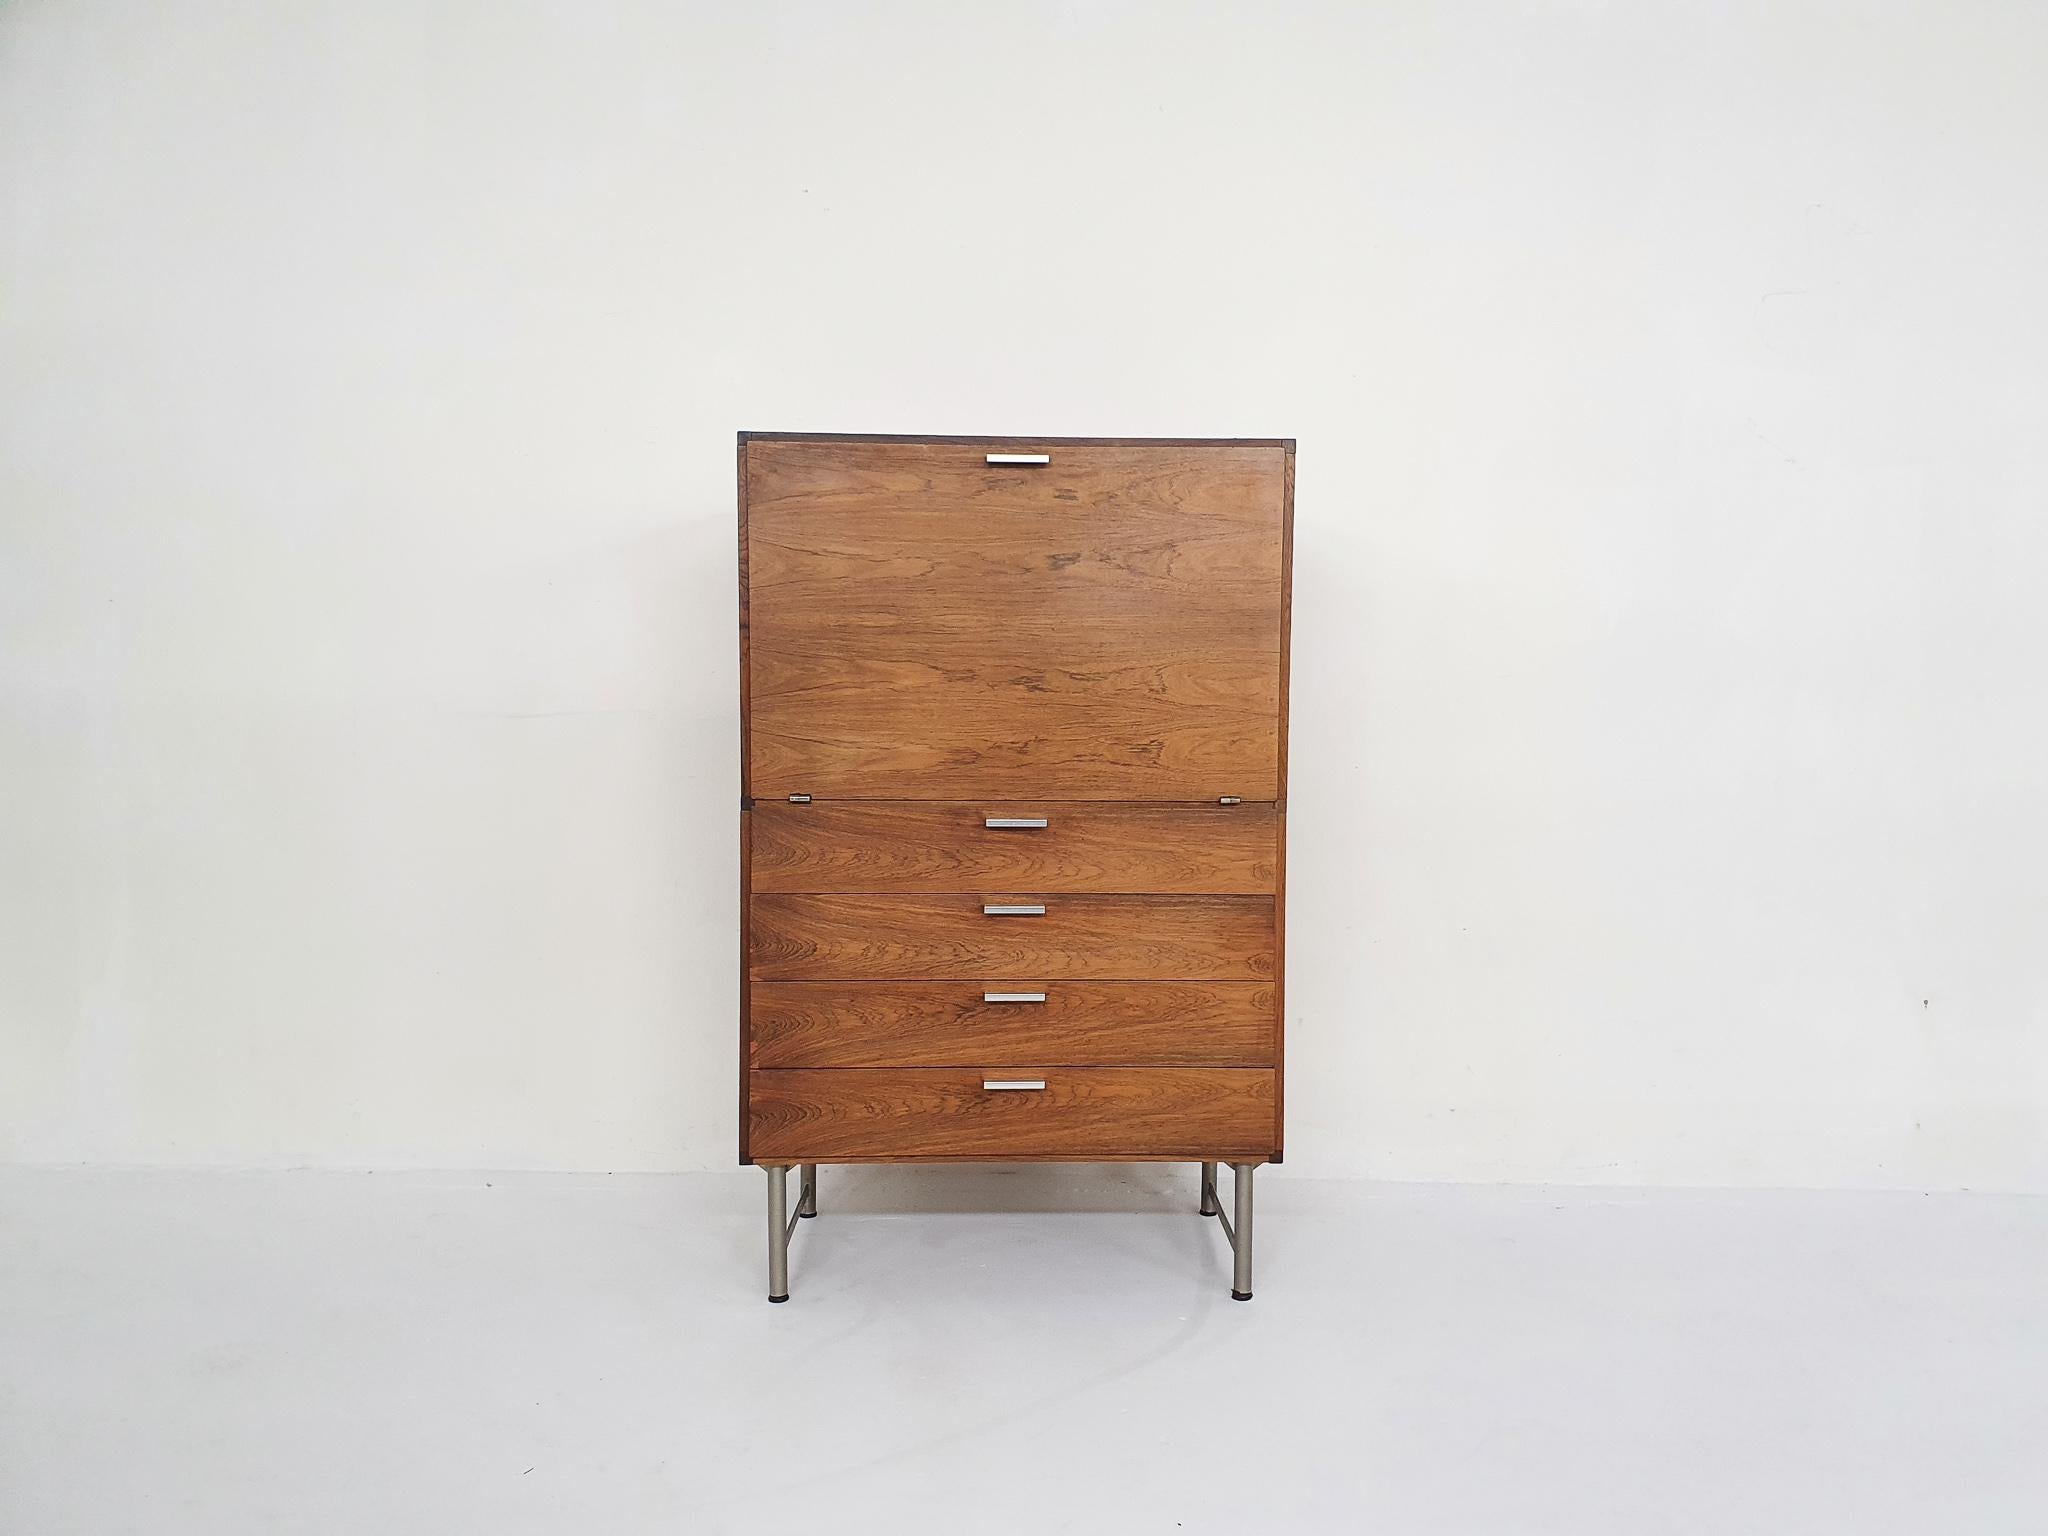 Rosewood veneer bar cabinet on metal legs. Designed in The Netherlands by Cees Braakman for Pastoe in 1959. 
Cees Braakman was a Dutch furniture designer who worked for UMS Pastoe in the midcentury. He designed many beautiful pieces with the “U+N